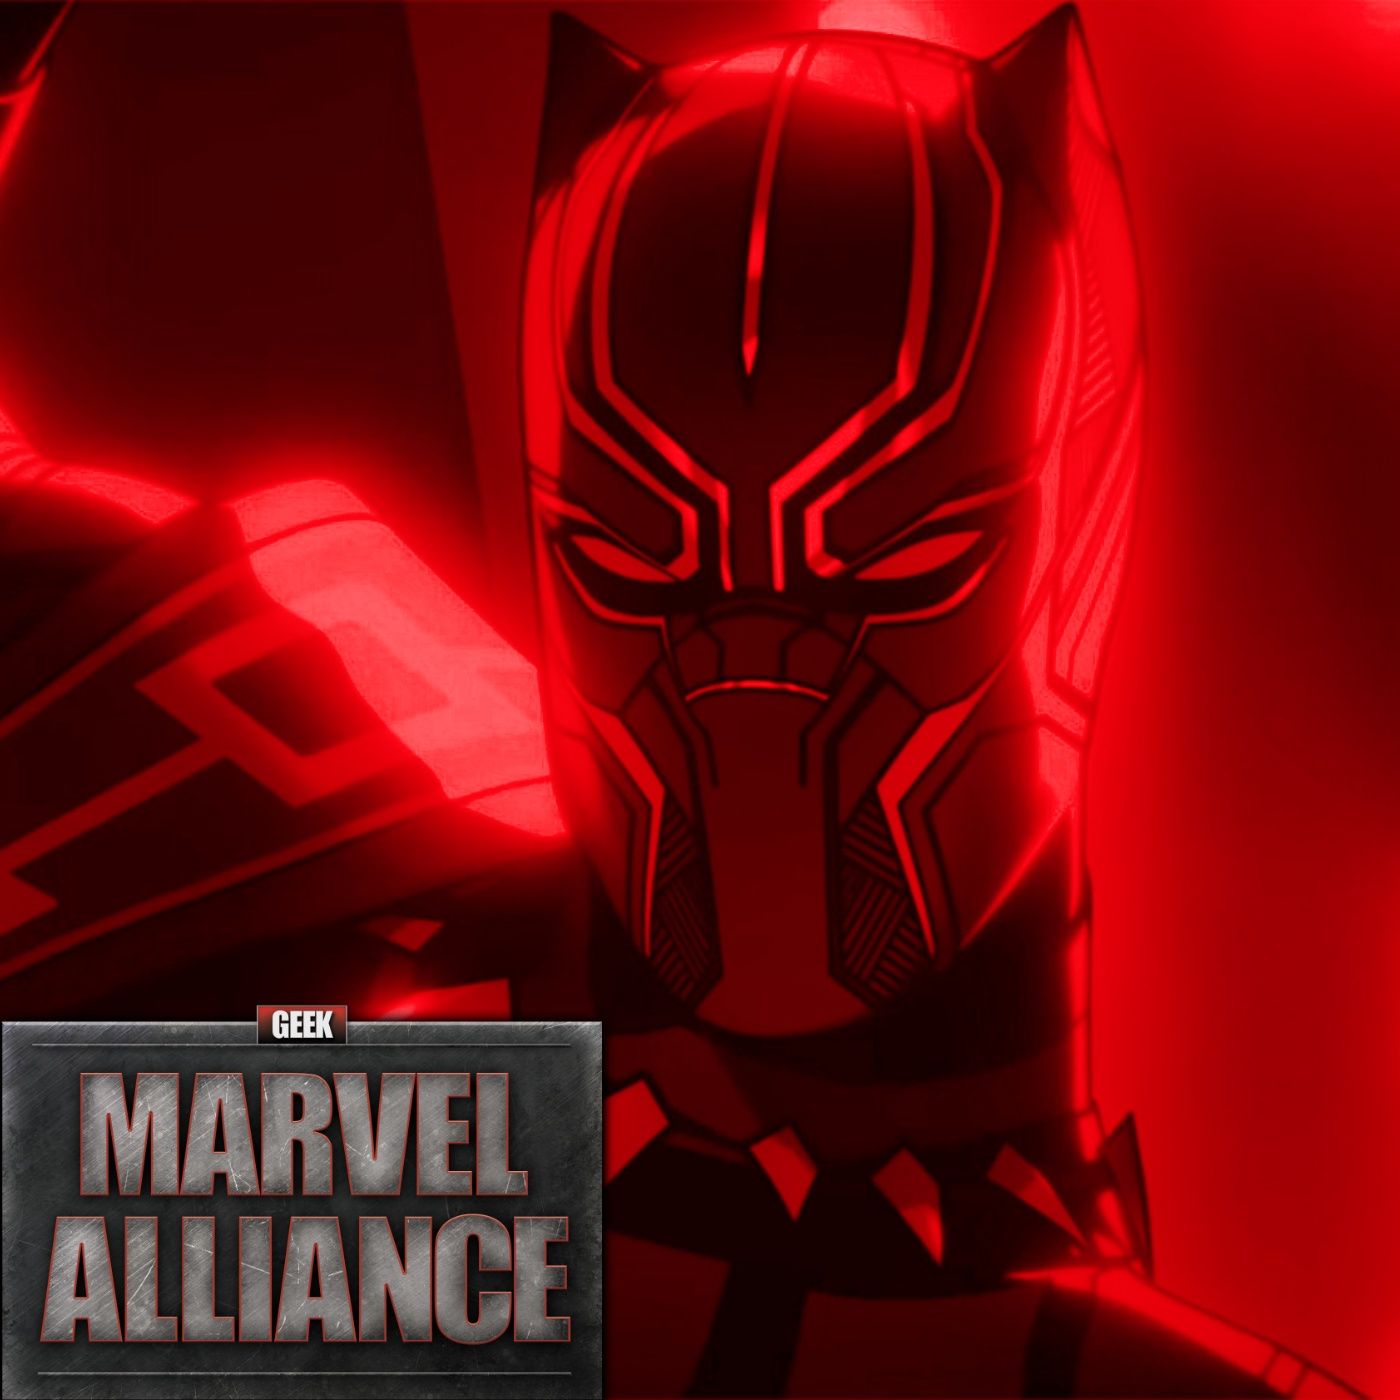 Black Panther Series Coming 2024 To Disney+ : Marvel Alliance Vol. 194